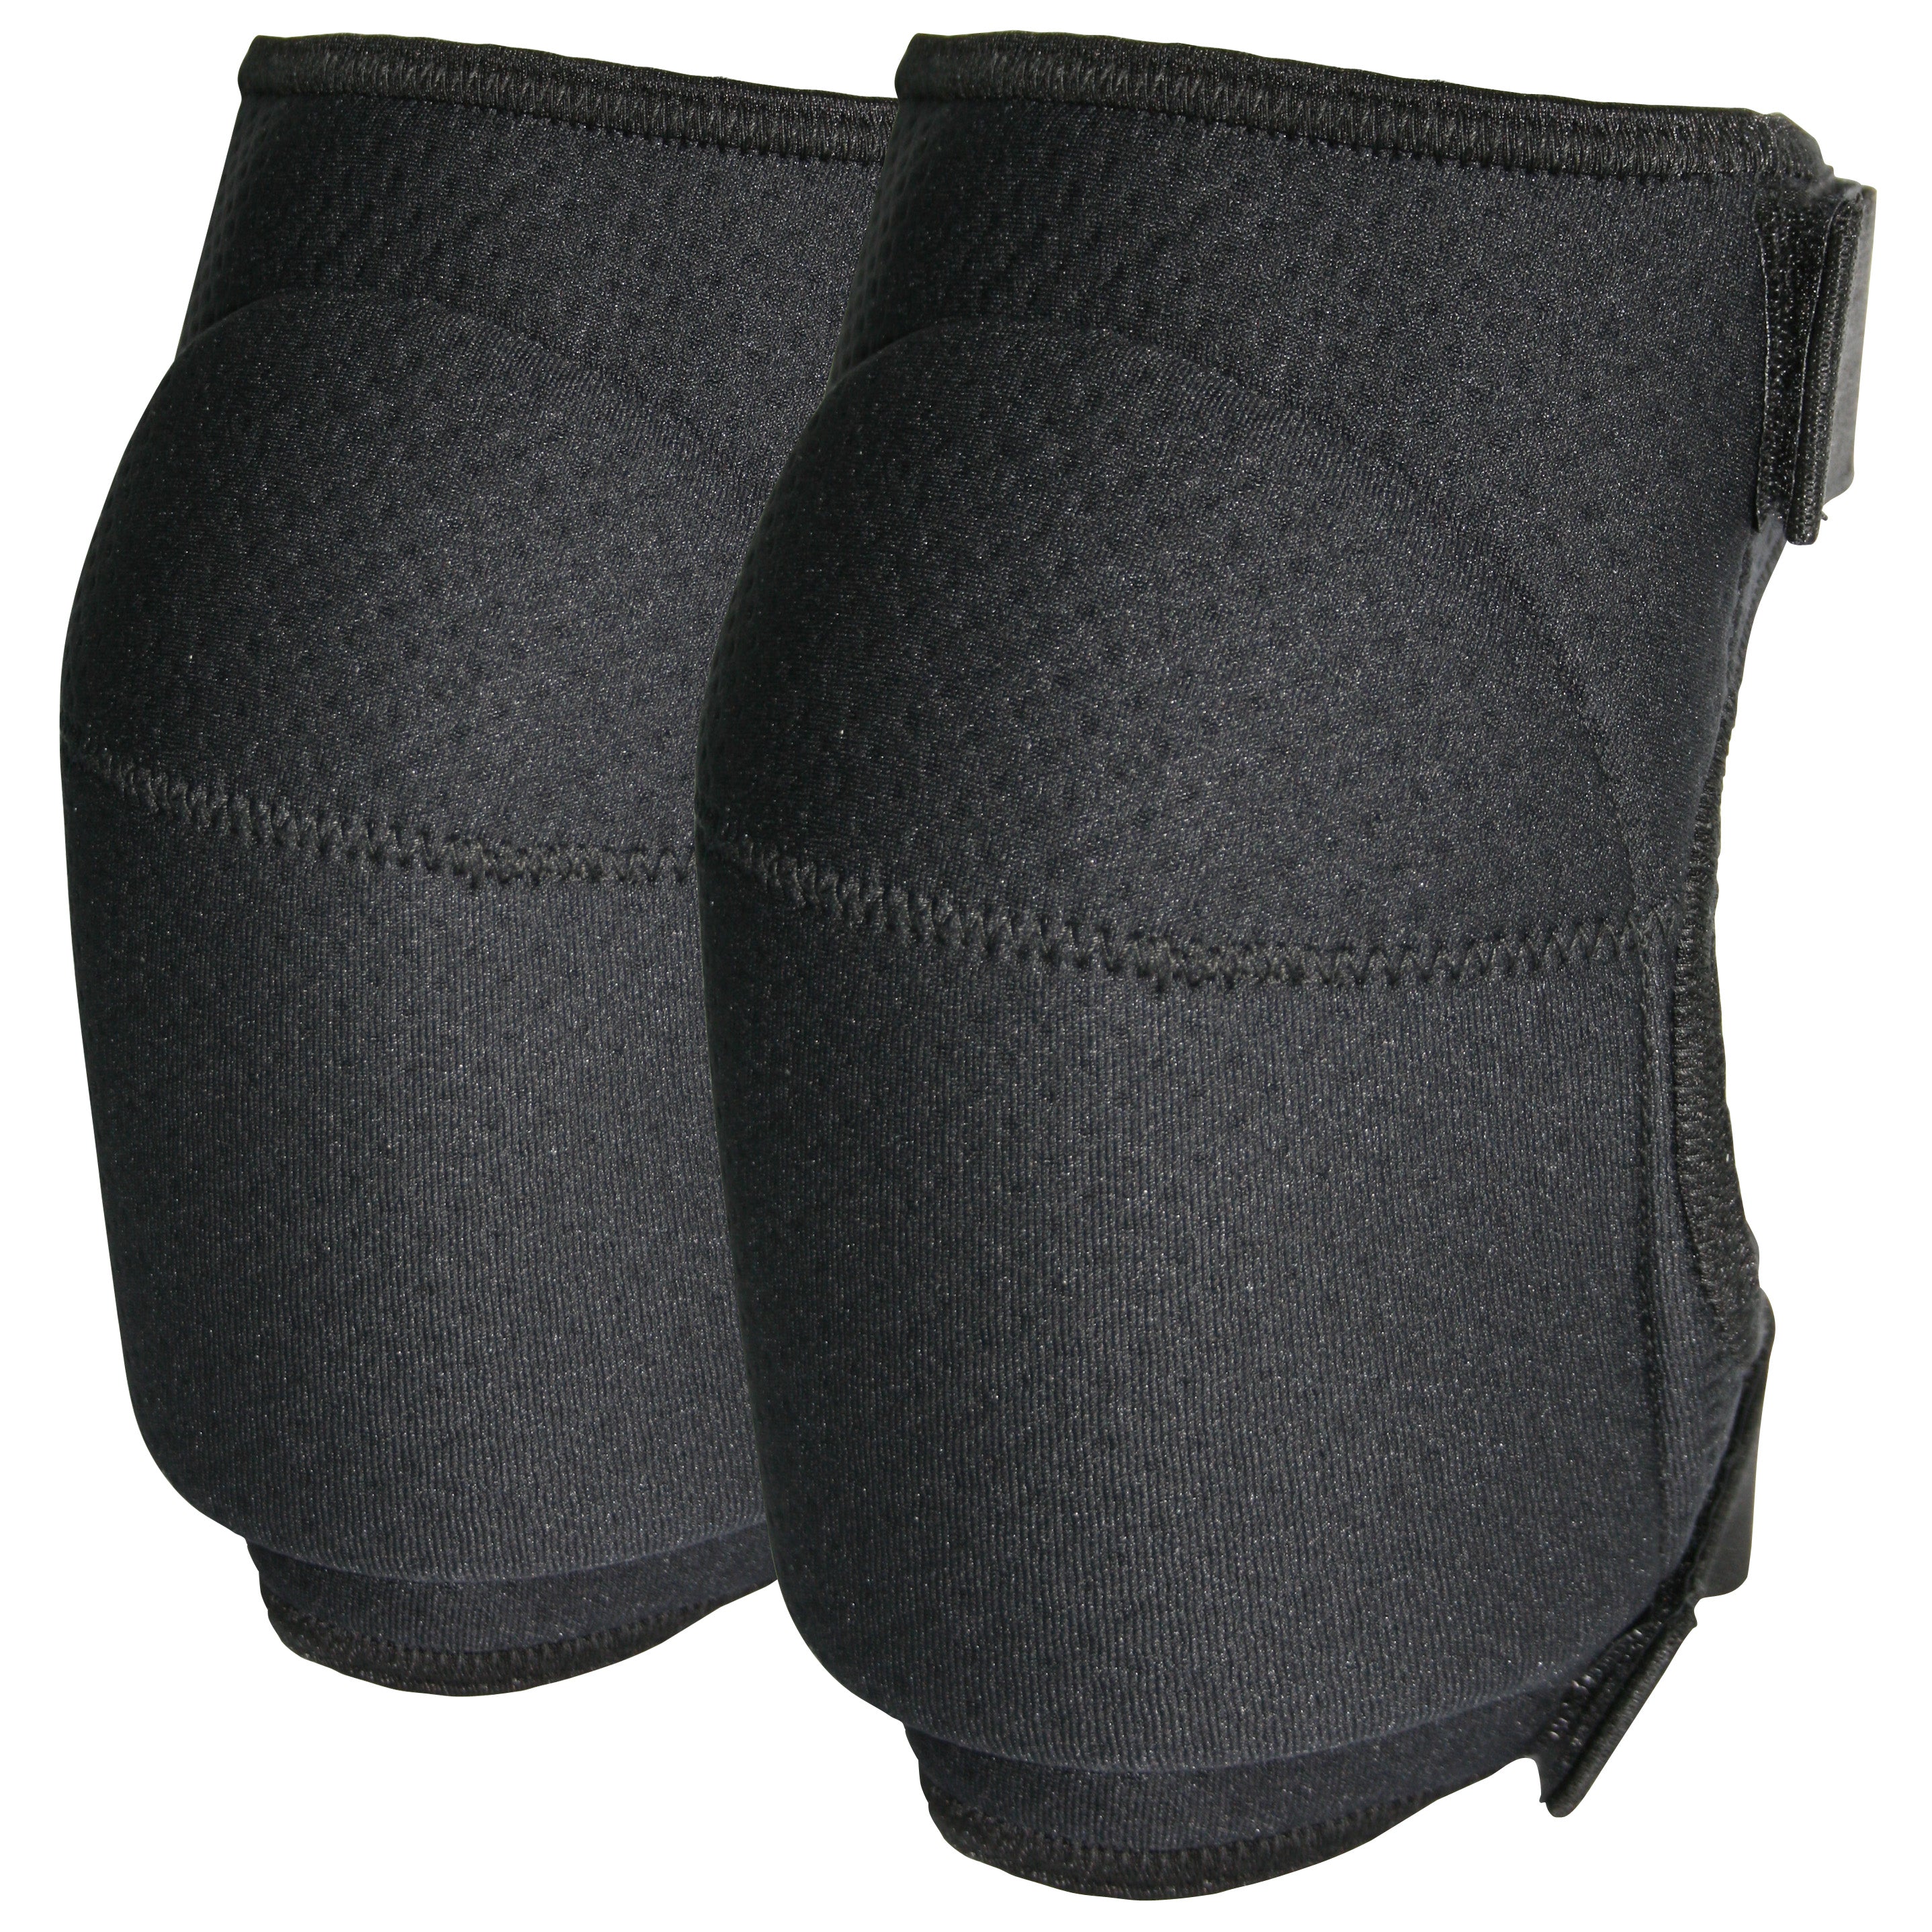 Worldwide Knee Pad-Safety Equipment-Tool Factory